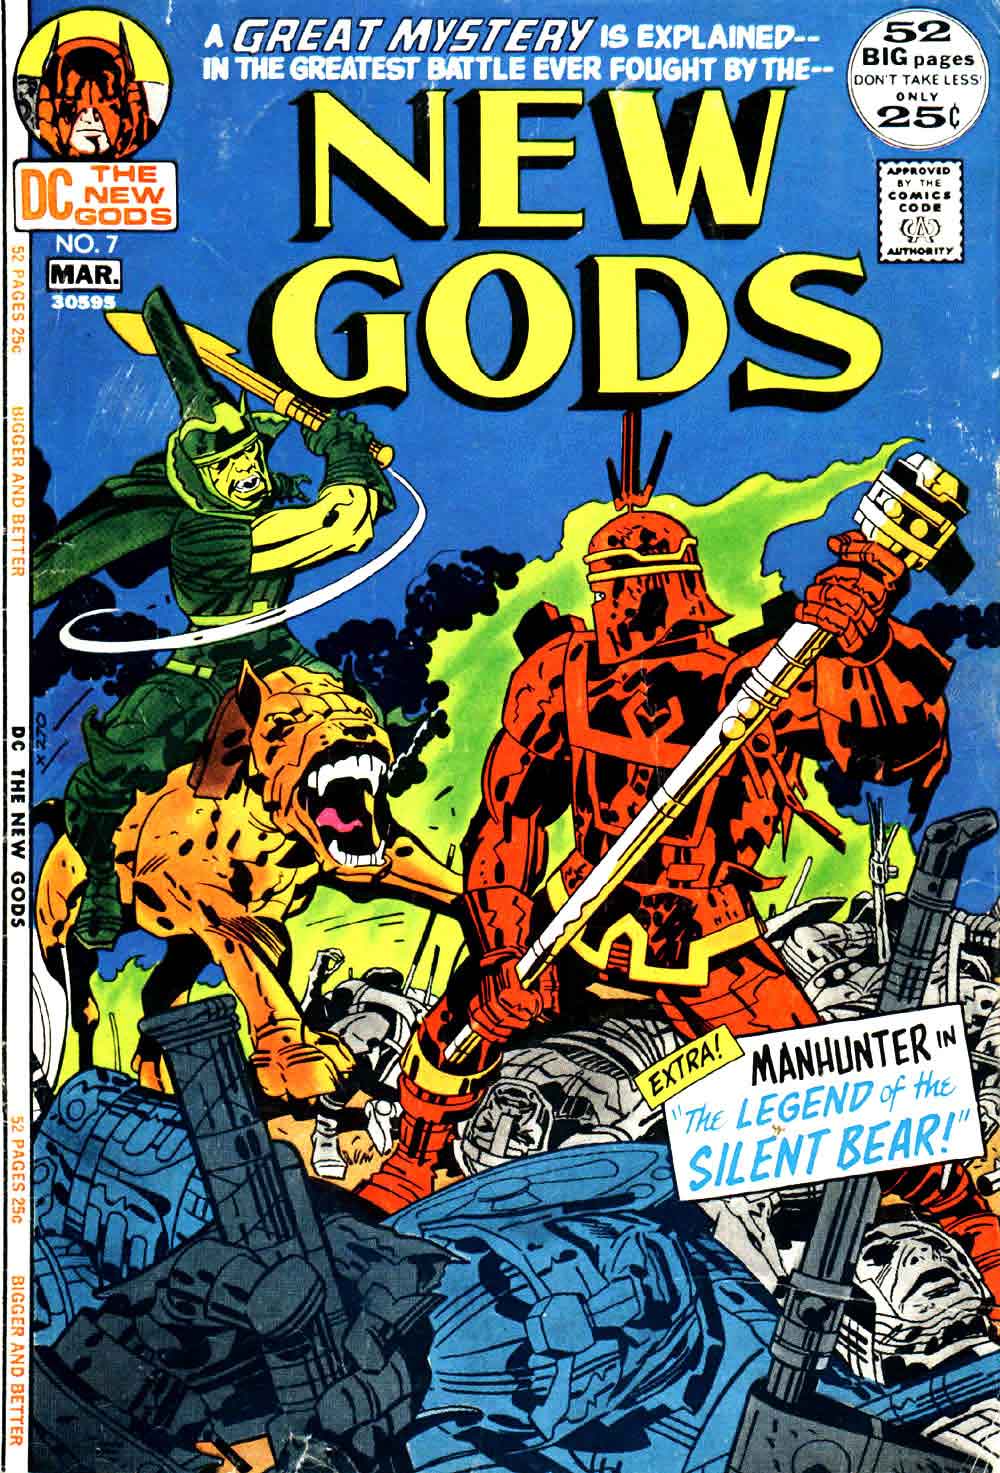 New Gods v1 #7 dc bronze age comic book cover art by Jack Kirby